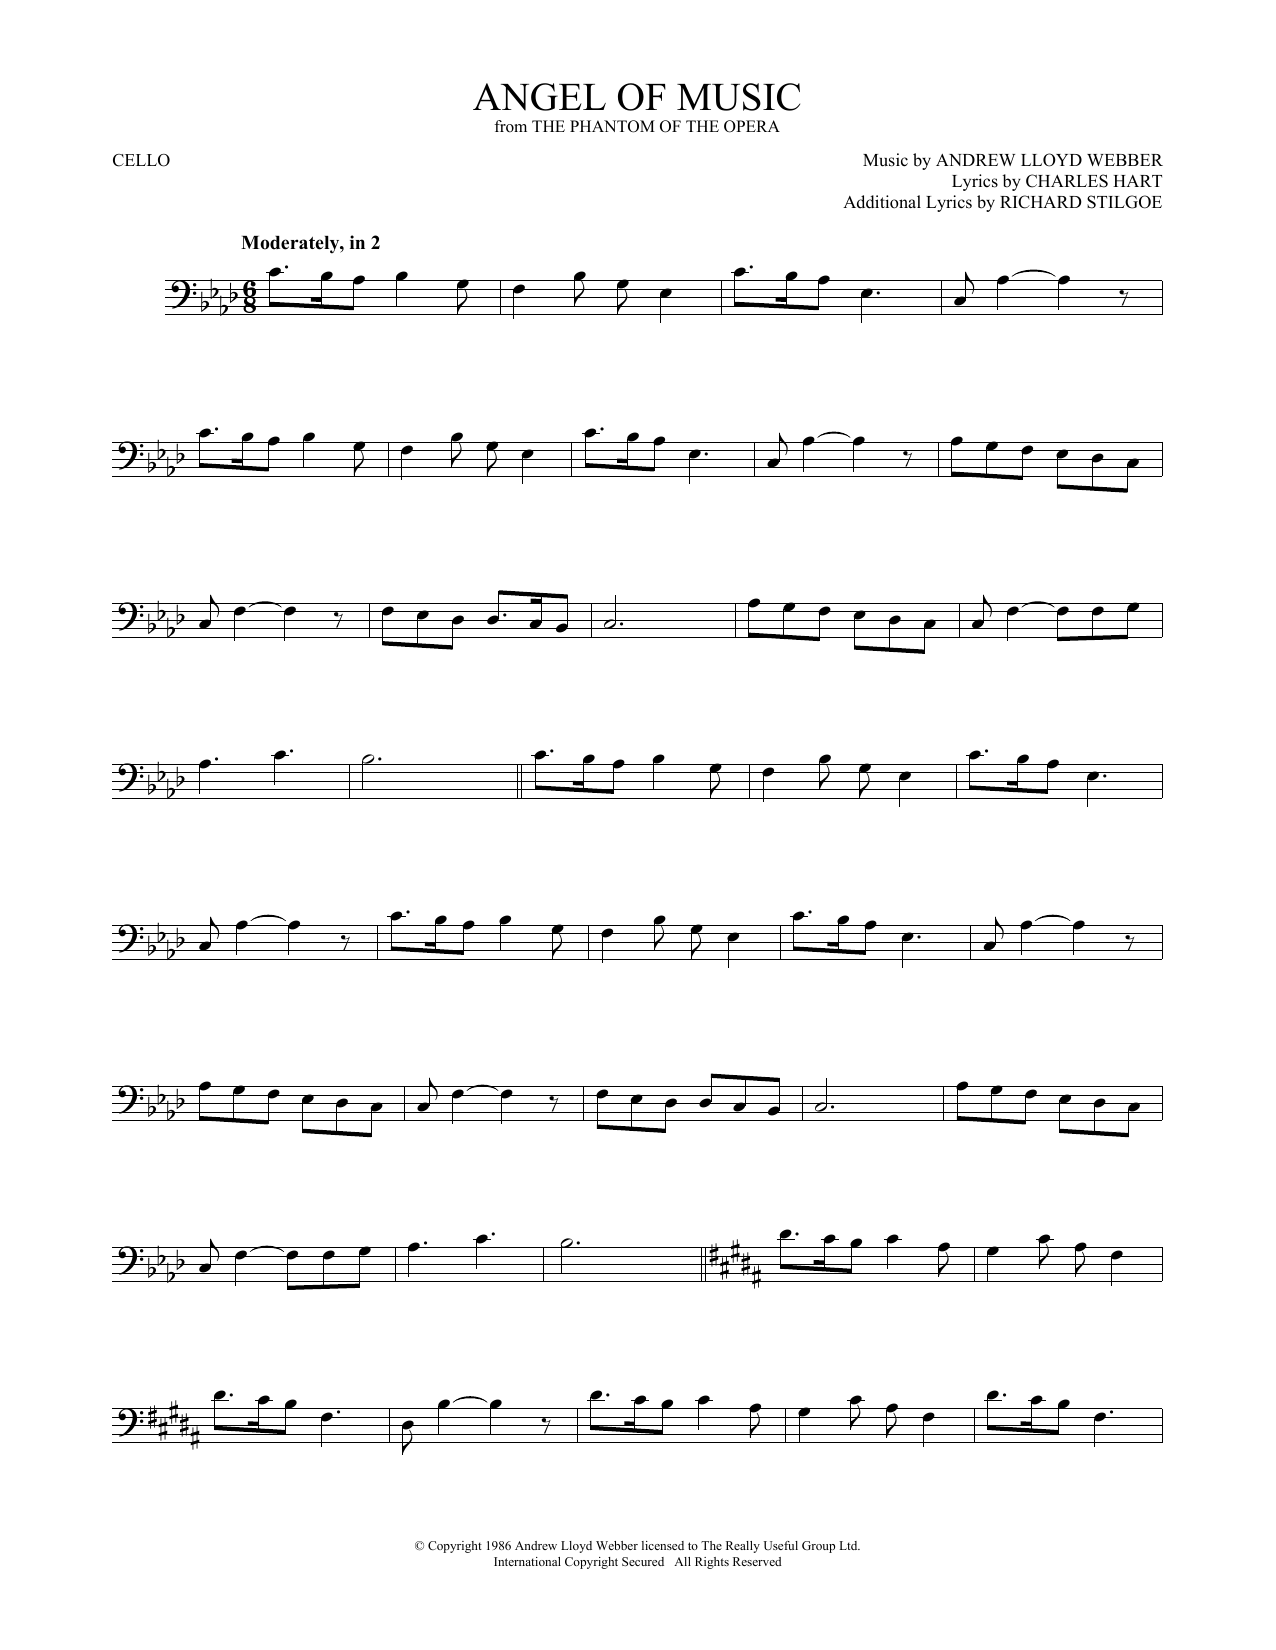 Andrew Lloyd Webber Angel Of Music (from The Phantom Of The Opera) sheet music notes and chords. Download Printable PDF.